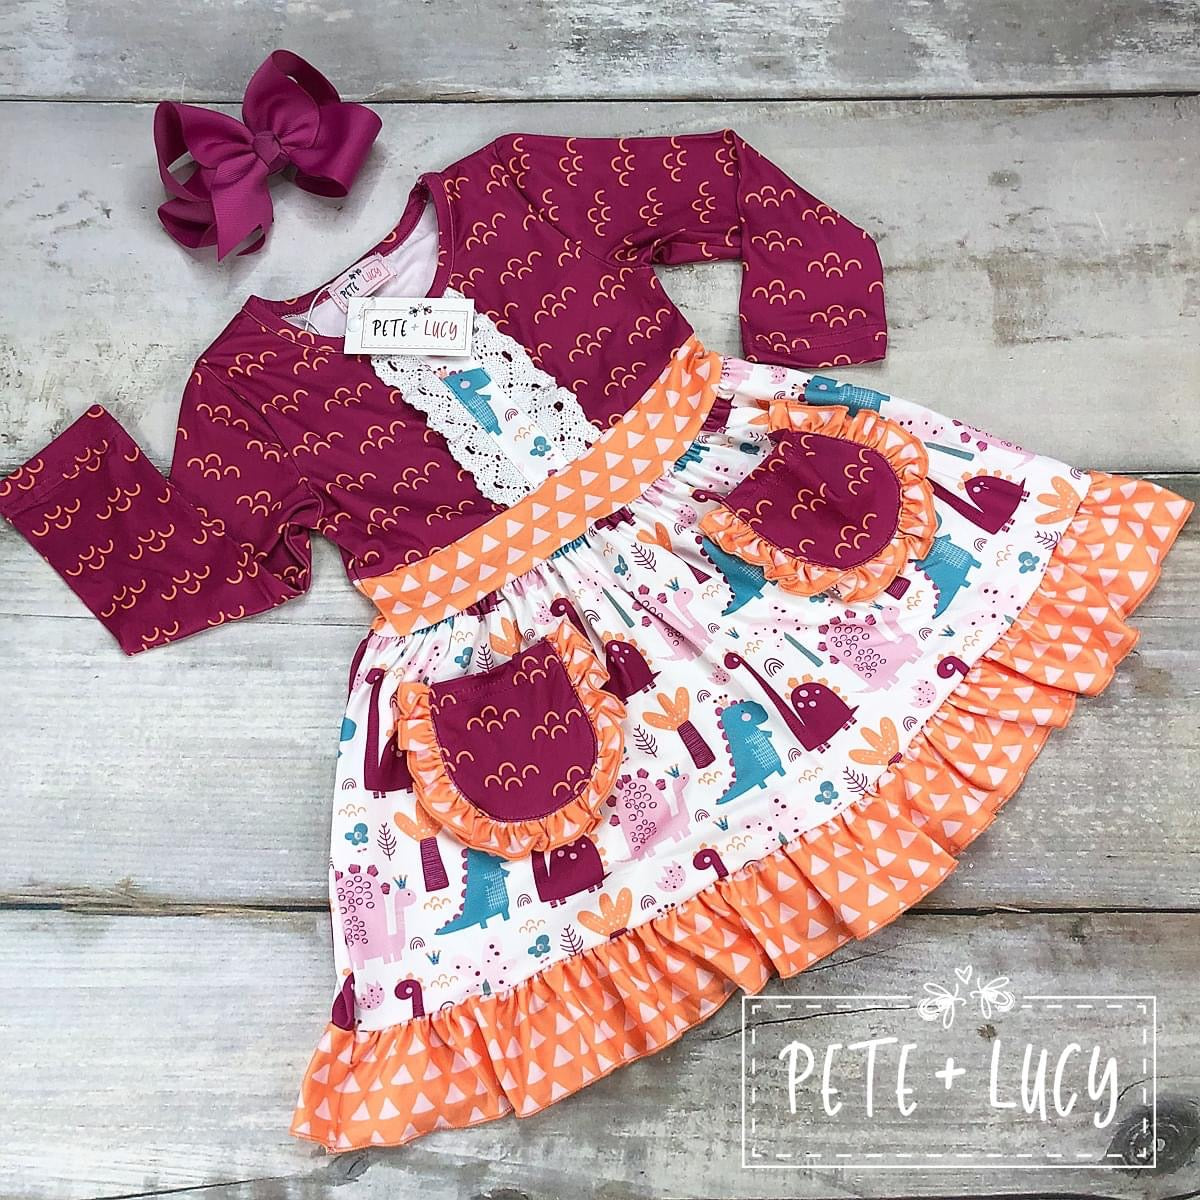 Serendipity's Closet Pete and Lucy dinosaur party dress